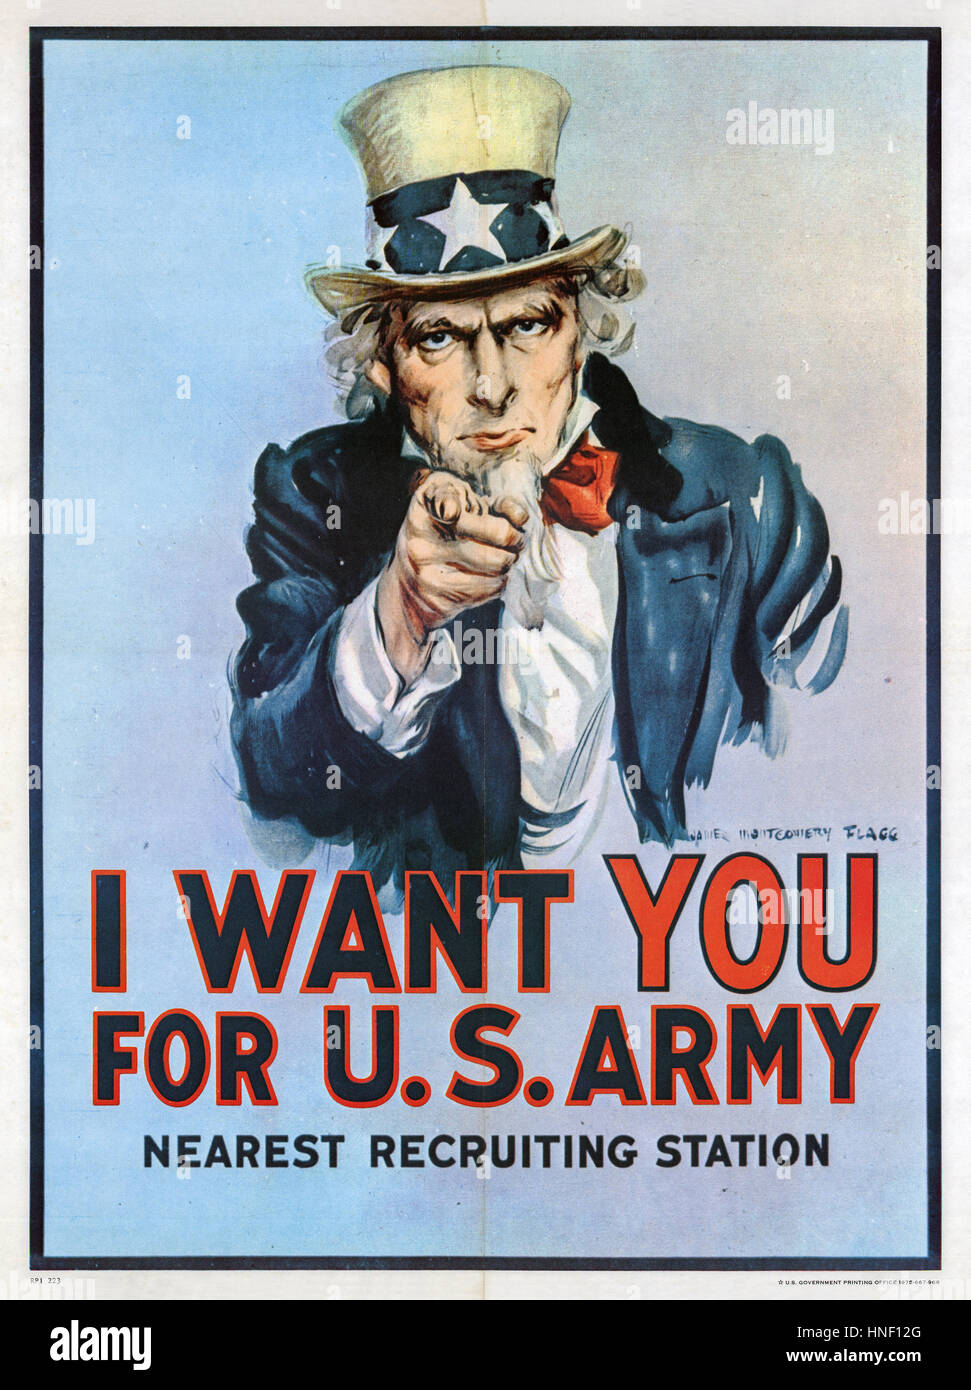 I WANT YOU FOR THE U.S. ARMY 1917 American recruiting poster designed by James Montgomery Flagg Stock Photo